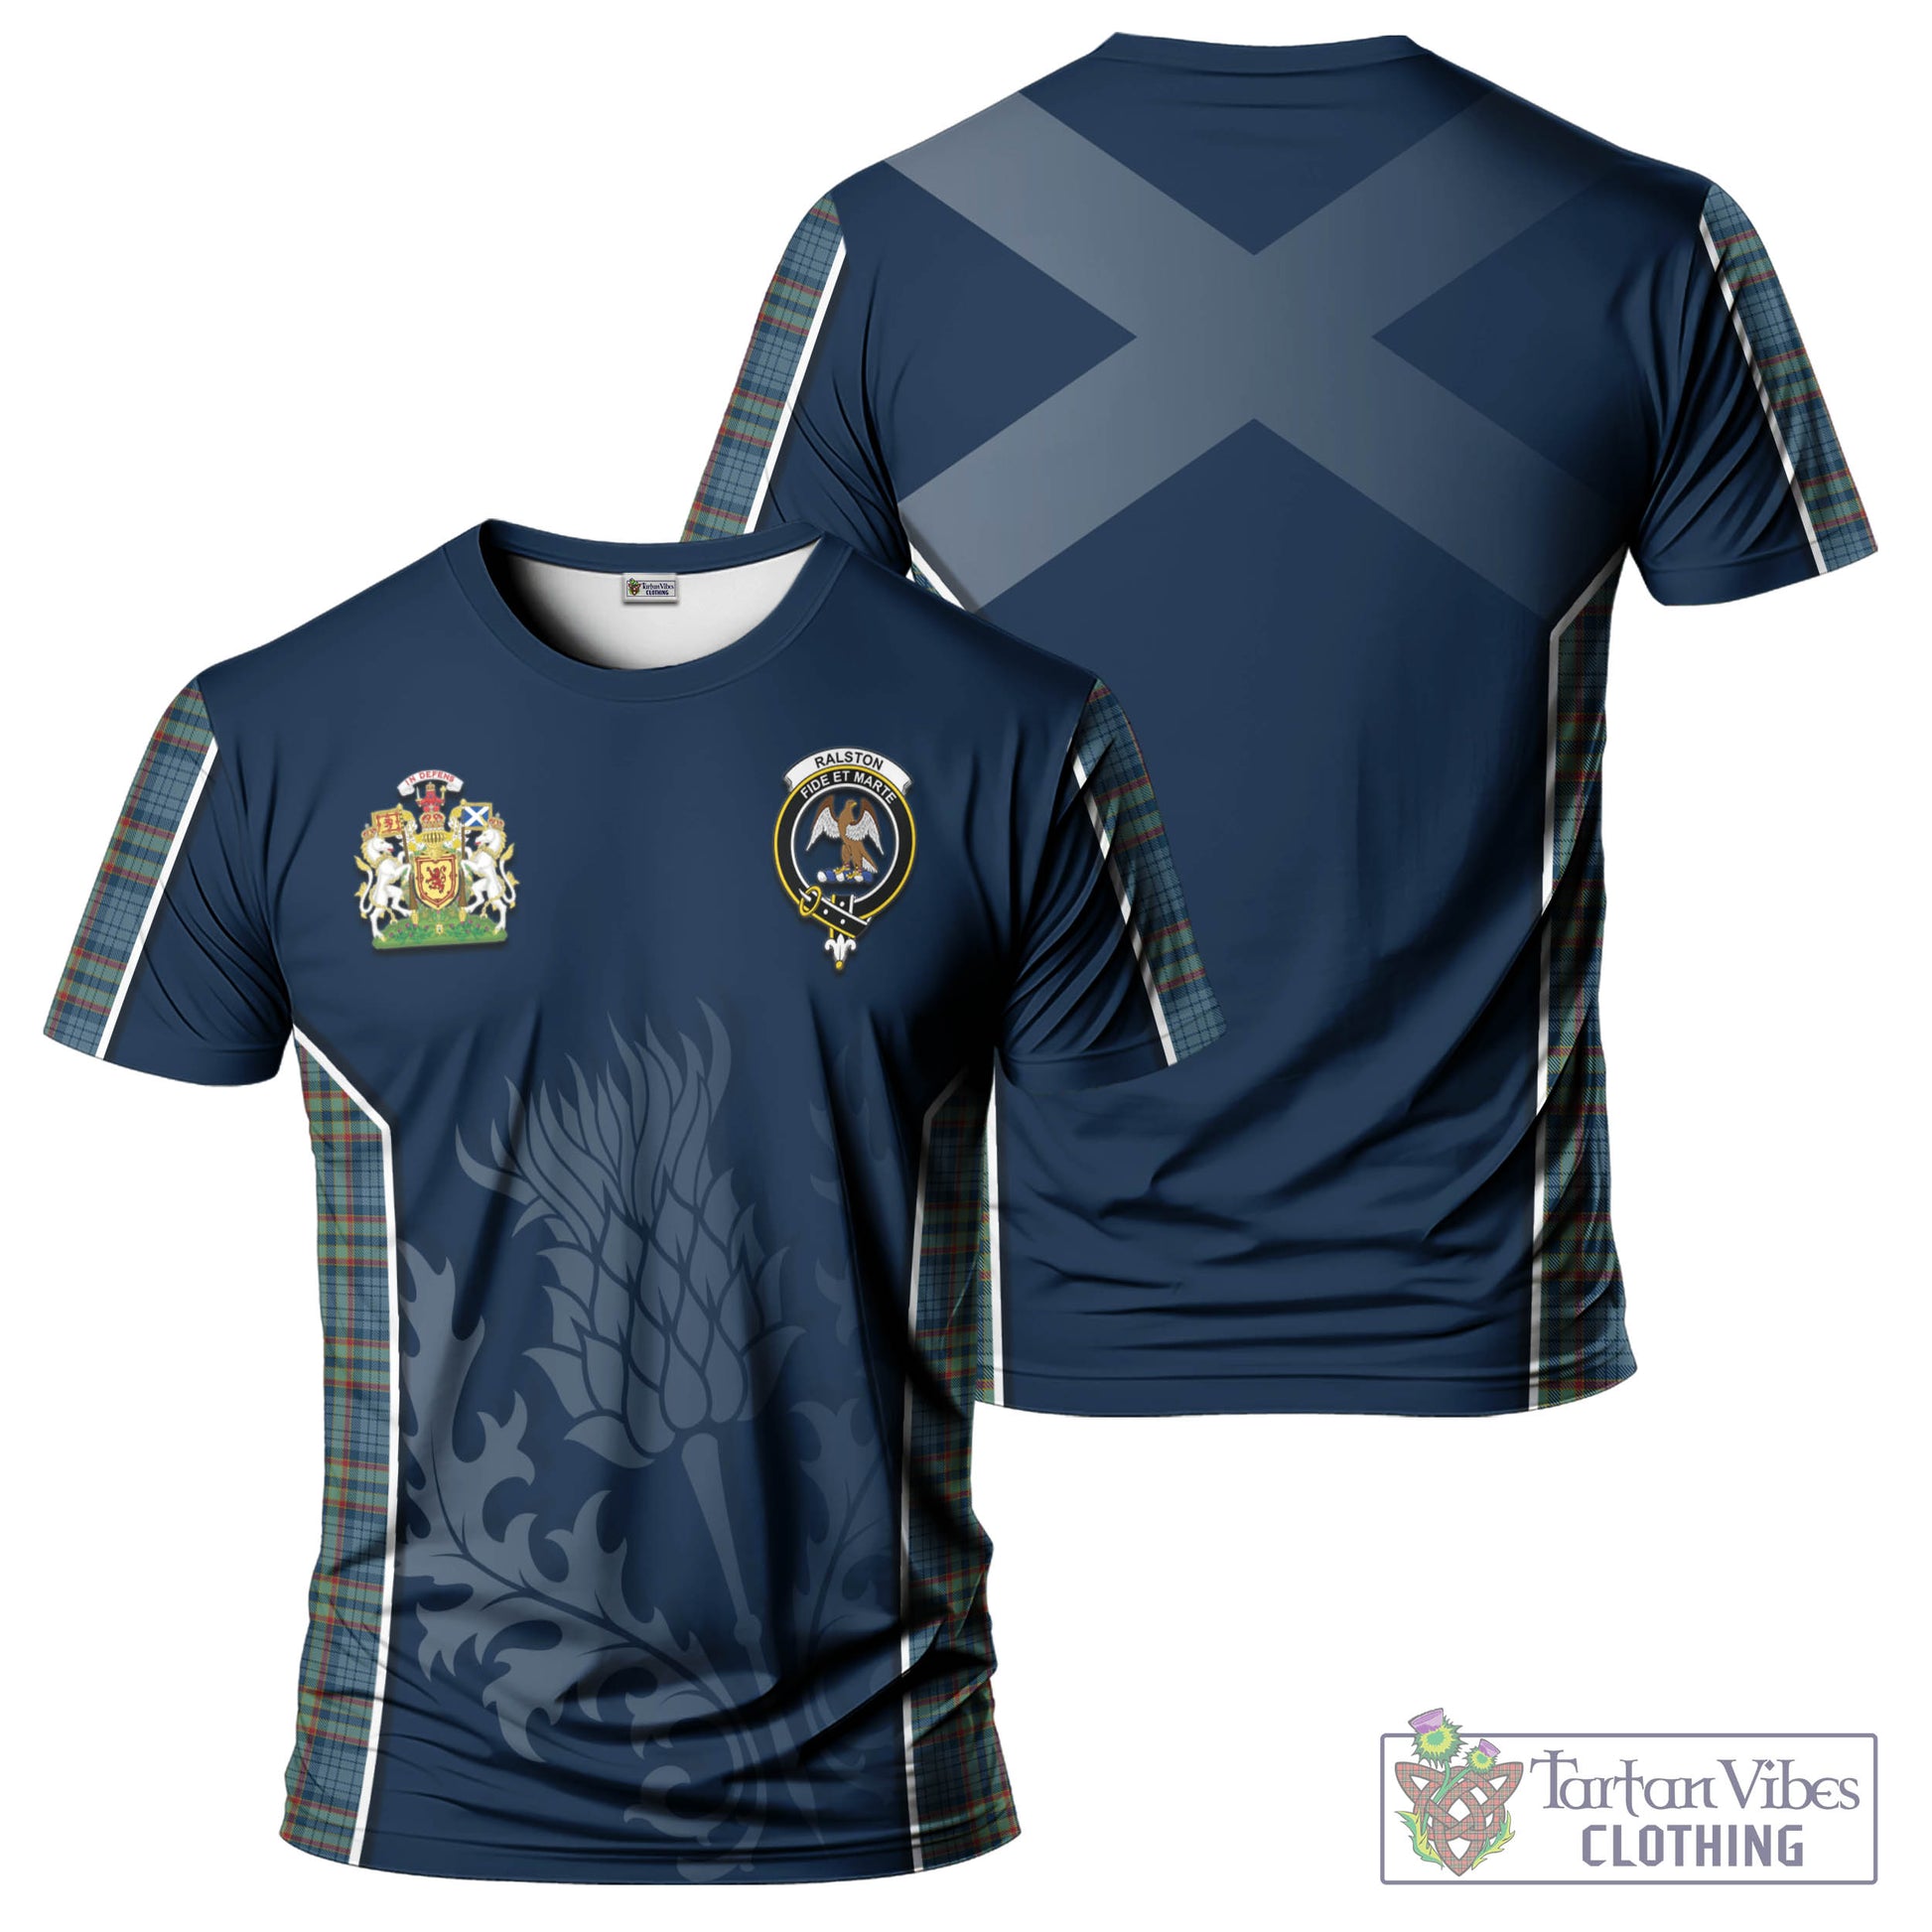 Tartan Vibes Clothing Ralston UK Tartan T-Shirt with Family Crest and Scottish Thistle Vibes Sport Style